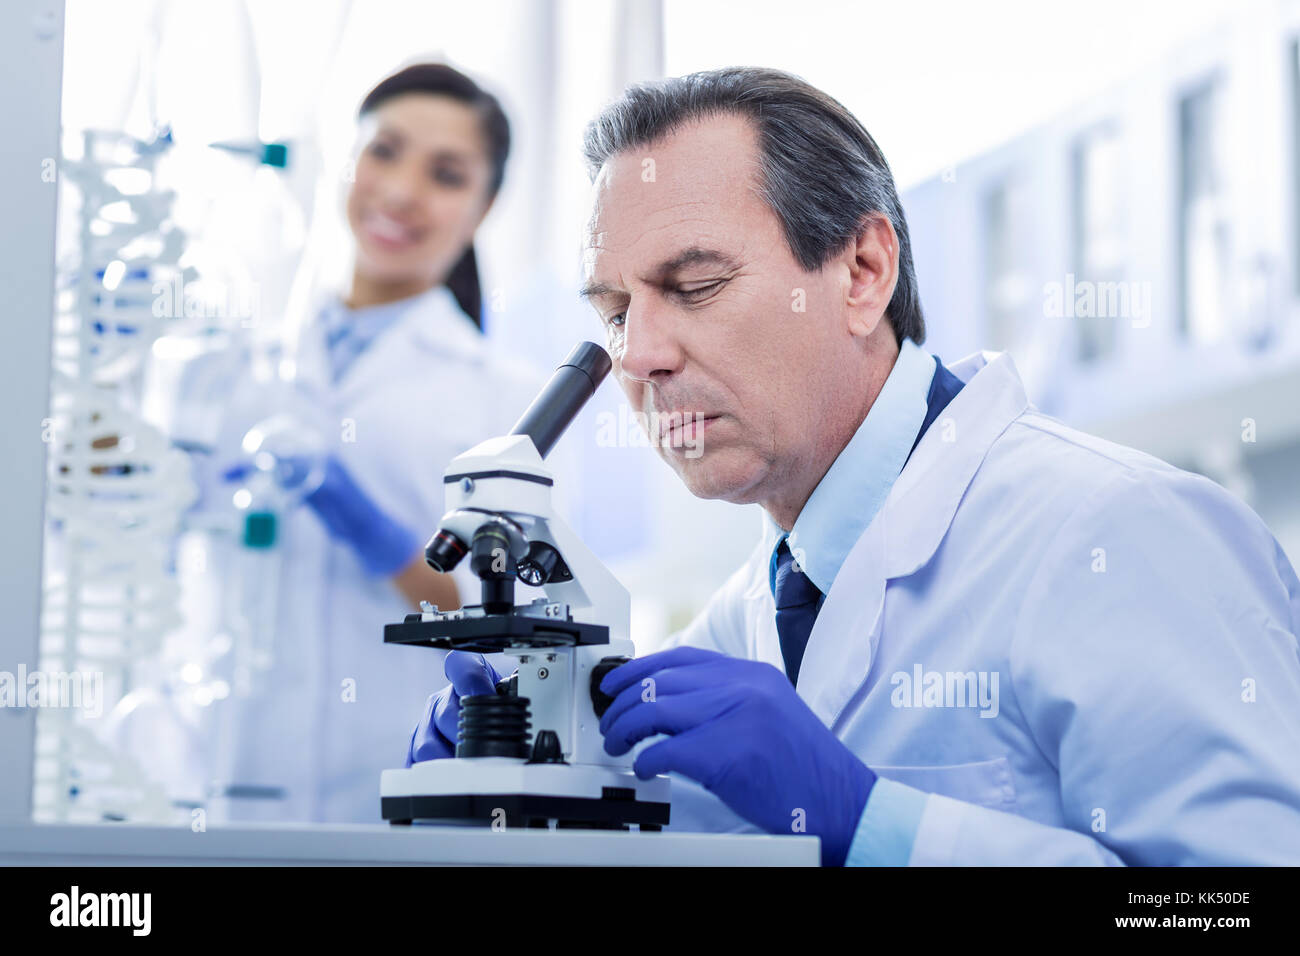 Serious adult man focusing on his work Stock Photo